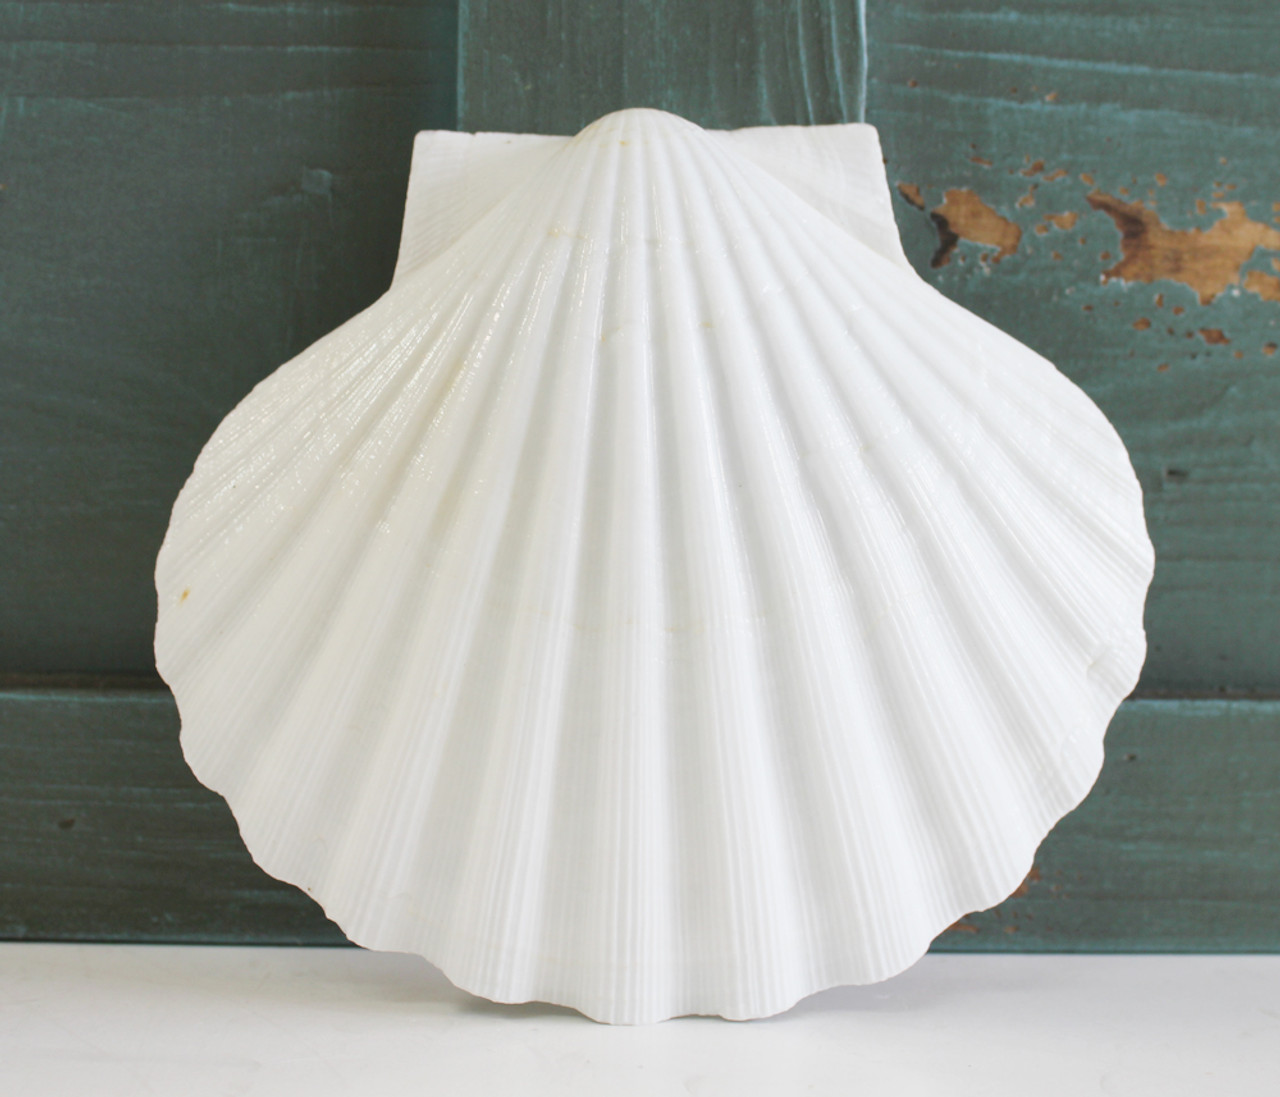 Scallop Shells Large UK Washed White Natural Scallop Shell 10-12cm 12, 24,  48, 100 